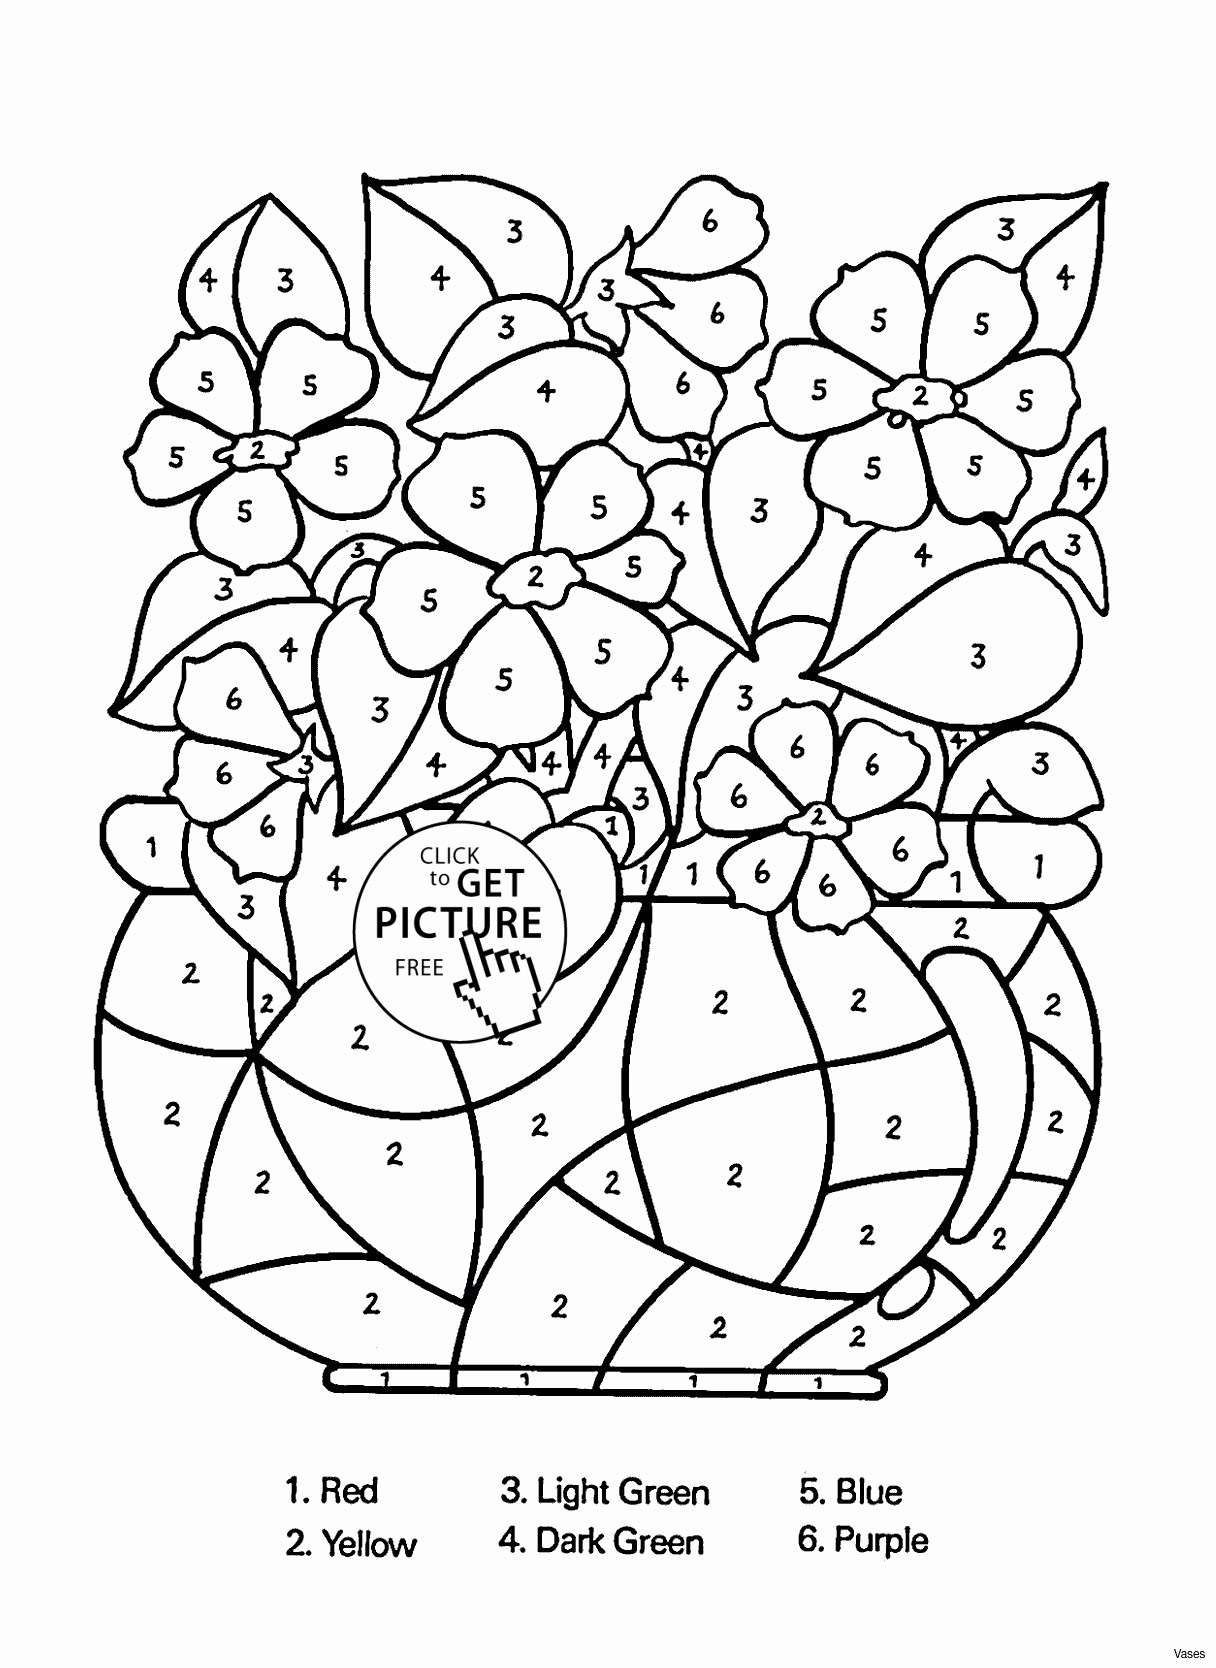 chinese vase stand of white glass vase elegant vases flower vase coloring page pages pertaining to white glass vase elegant vases flower vase coloring page pages flowers in a top i 0d